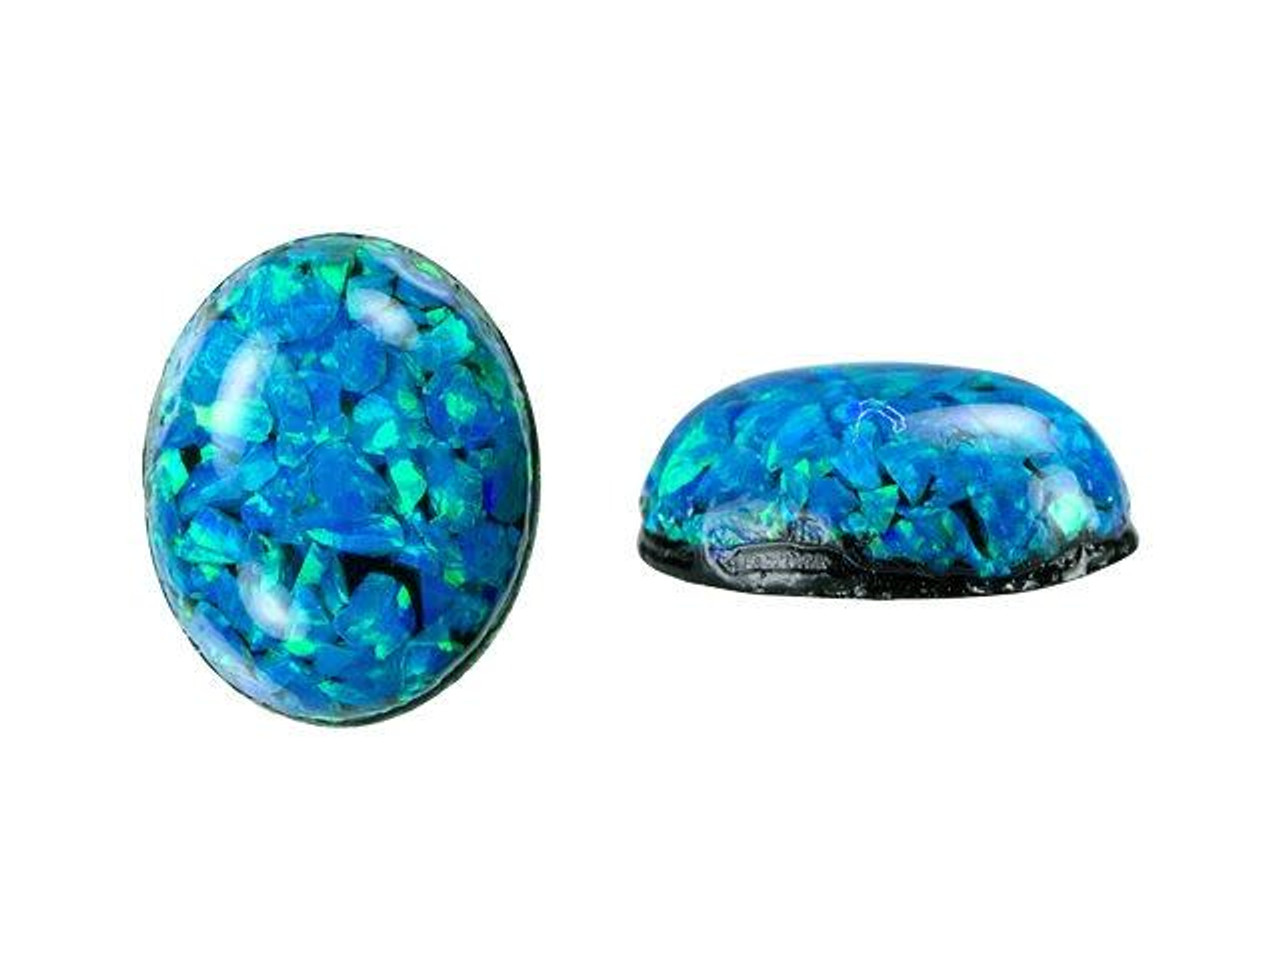 18mm round crackle glass cabochons, blue